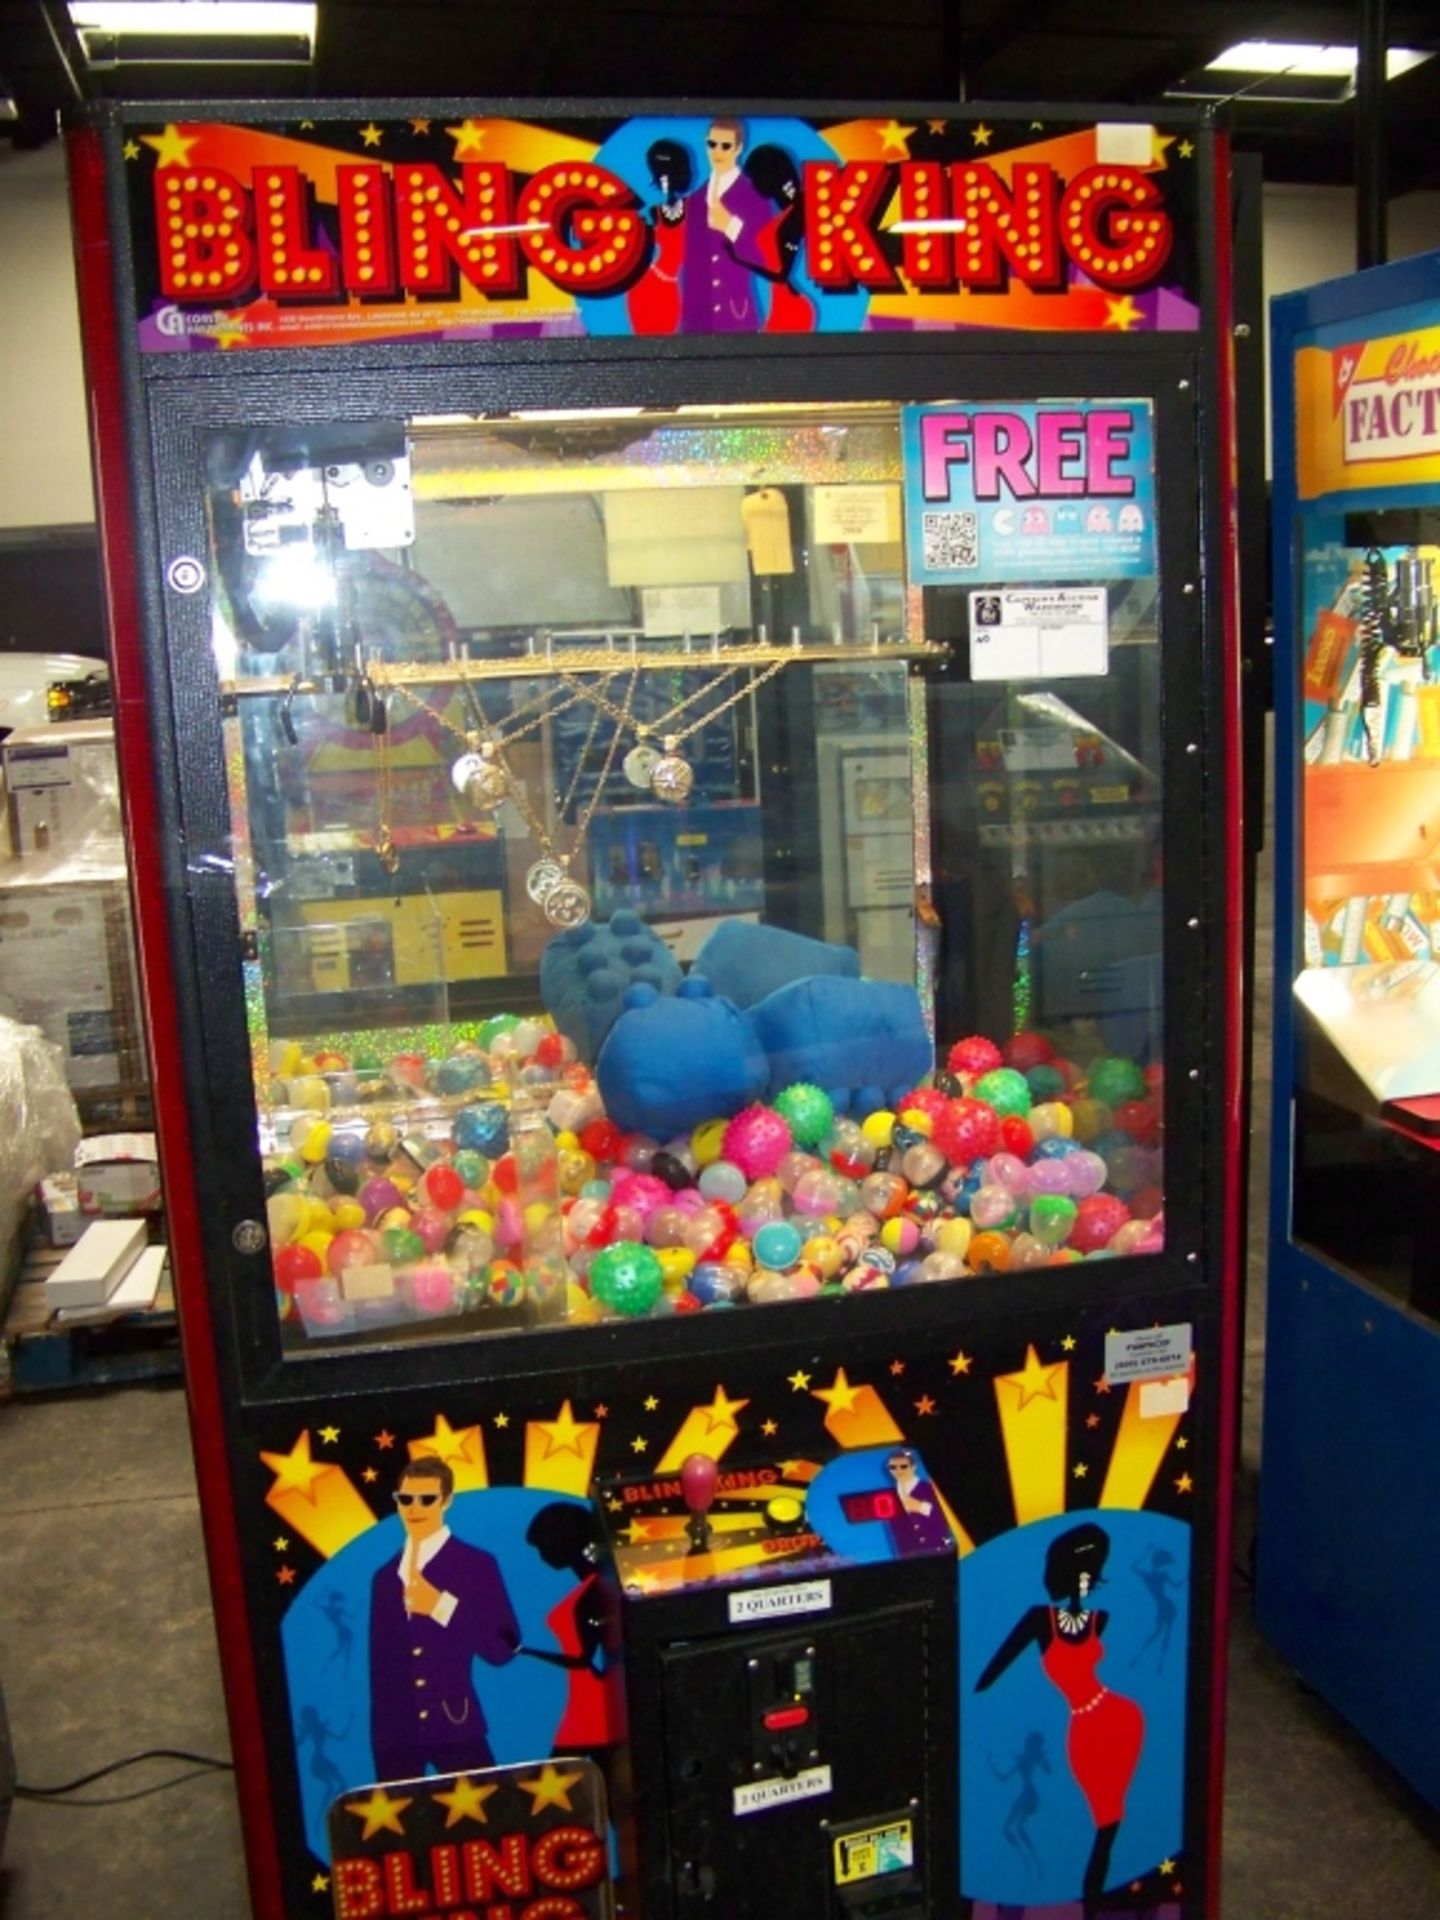 42" BLING KING JEWELRY CLAW CRANE MACHINE - Image 3 of 3